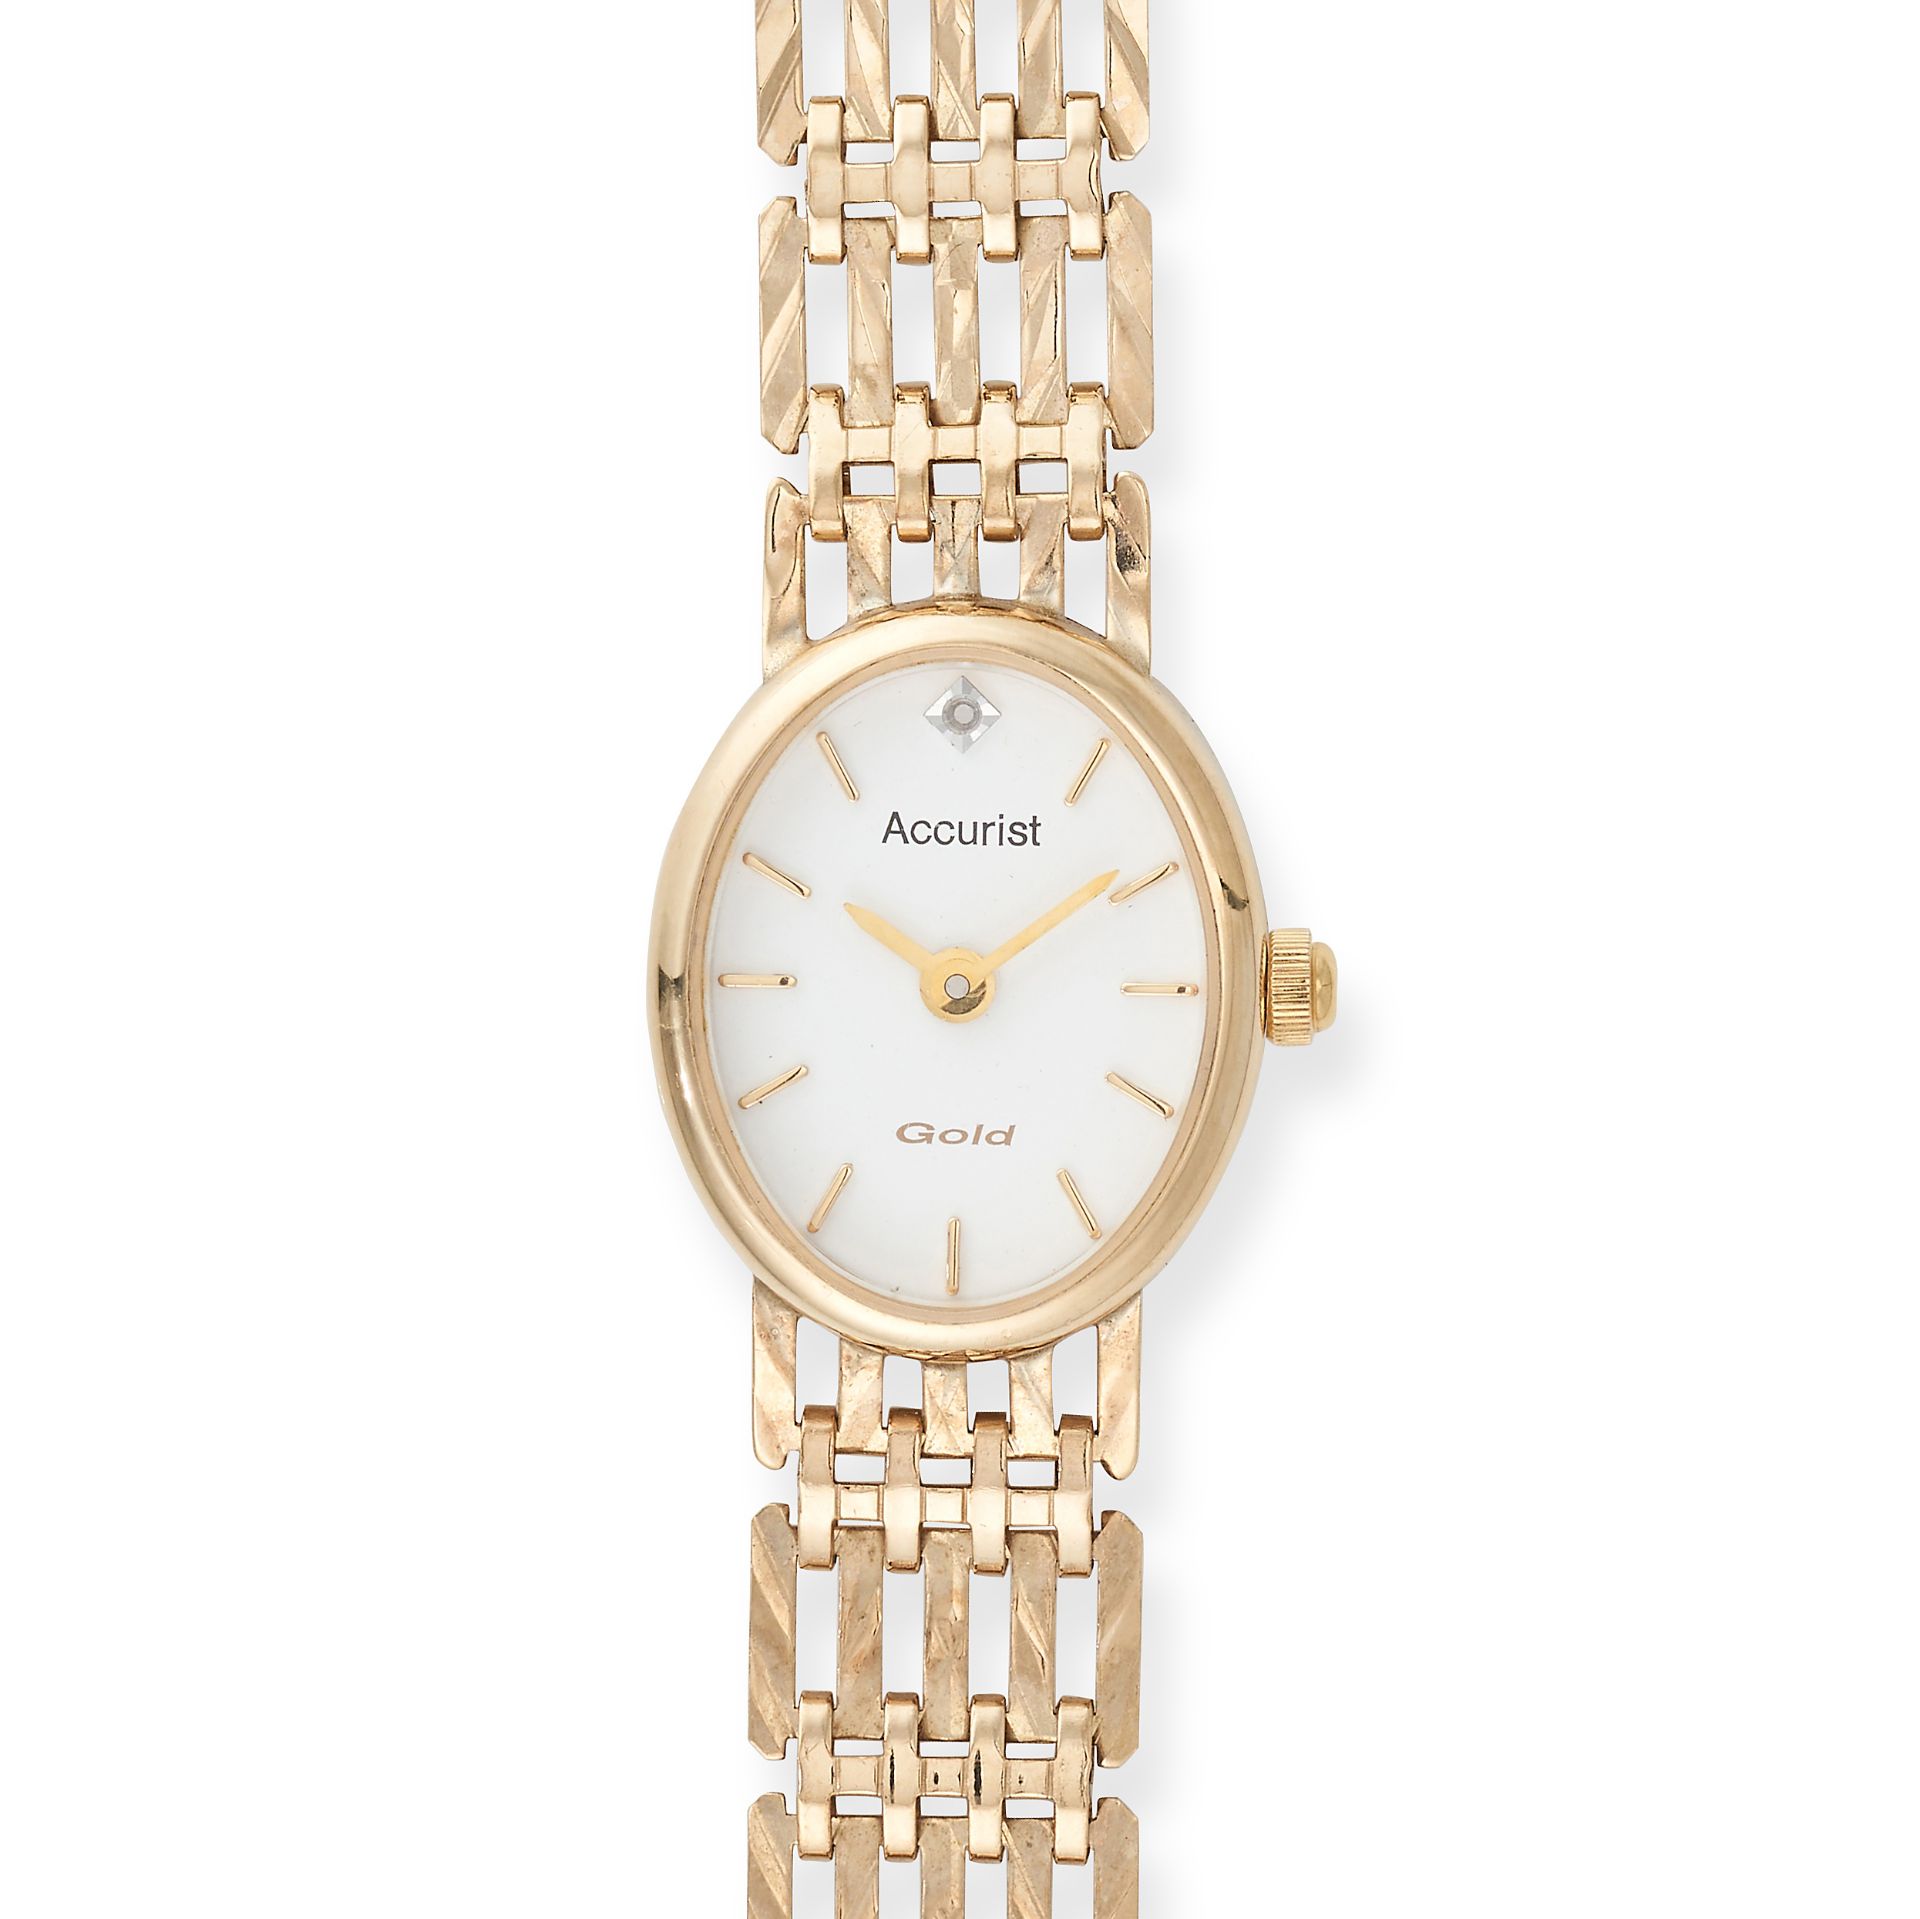 NO RESERVE - ACCURIST, A LADIES WRISTWATCH in 9ct yellow gold, oval case surrounding a white dial...